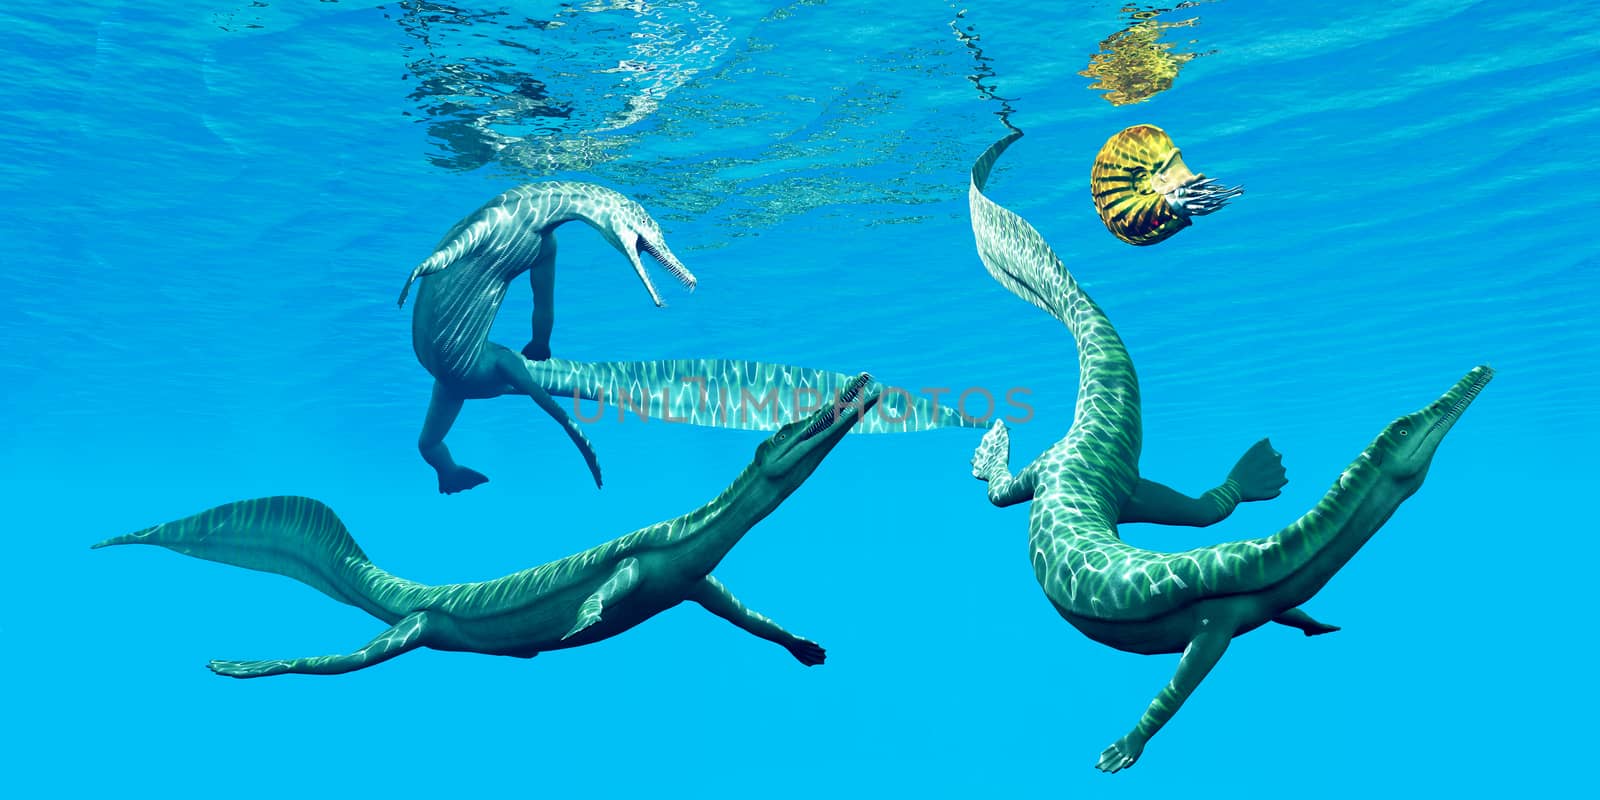 Mesosaurus reptiles go after an Ammonite which was a frequent prey in the oceans of the Permian Period.